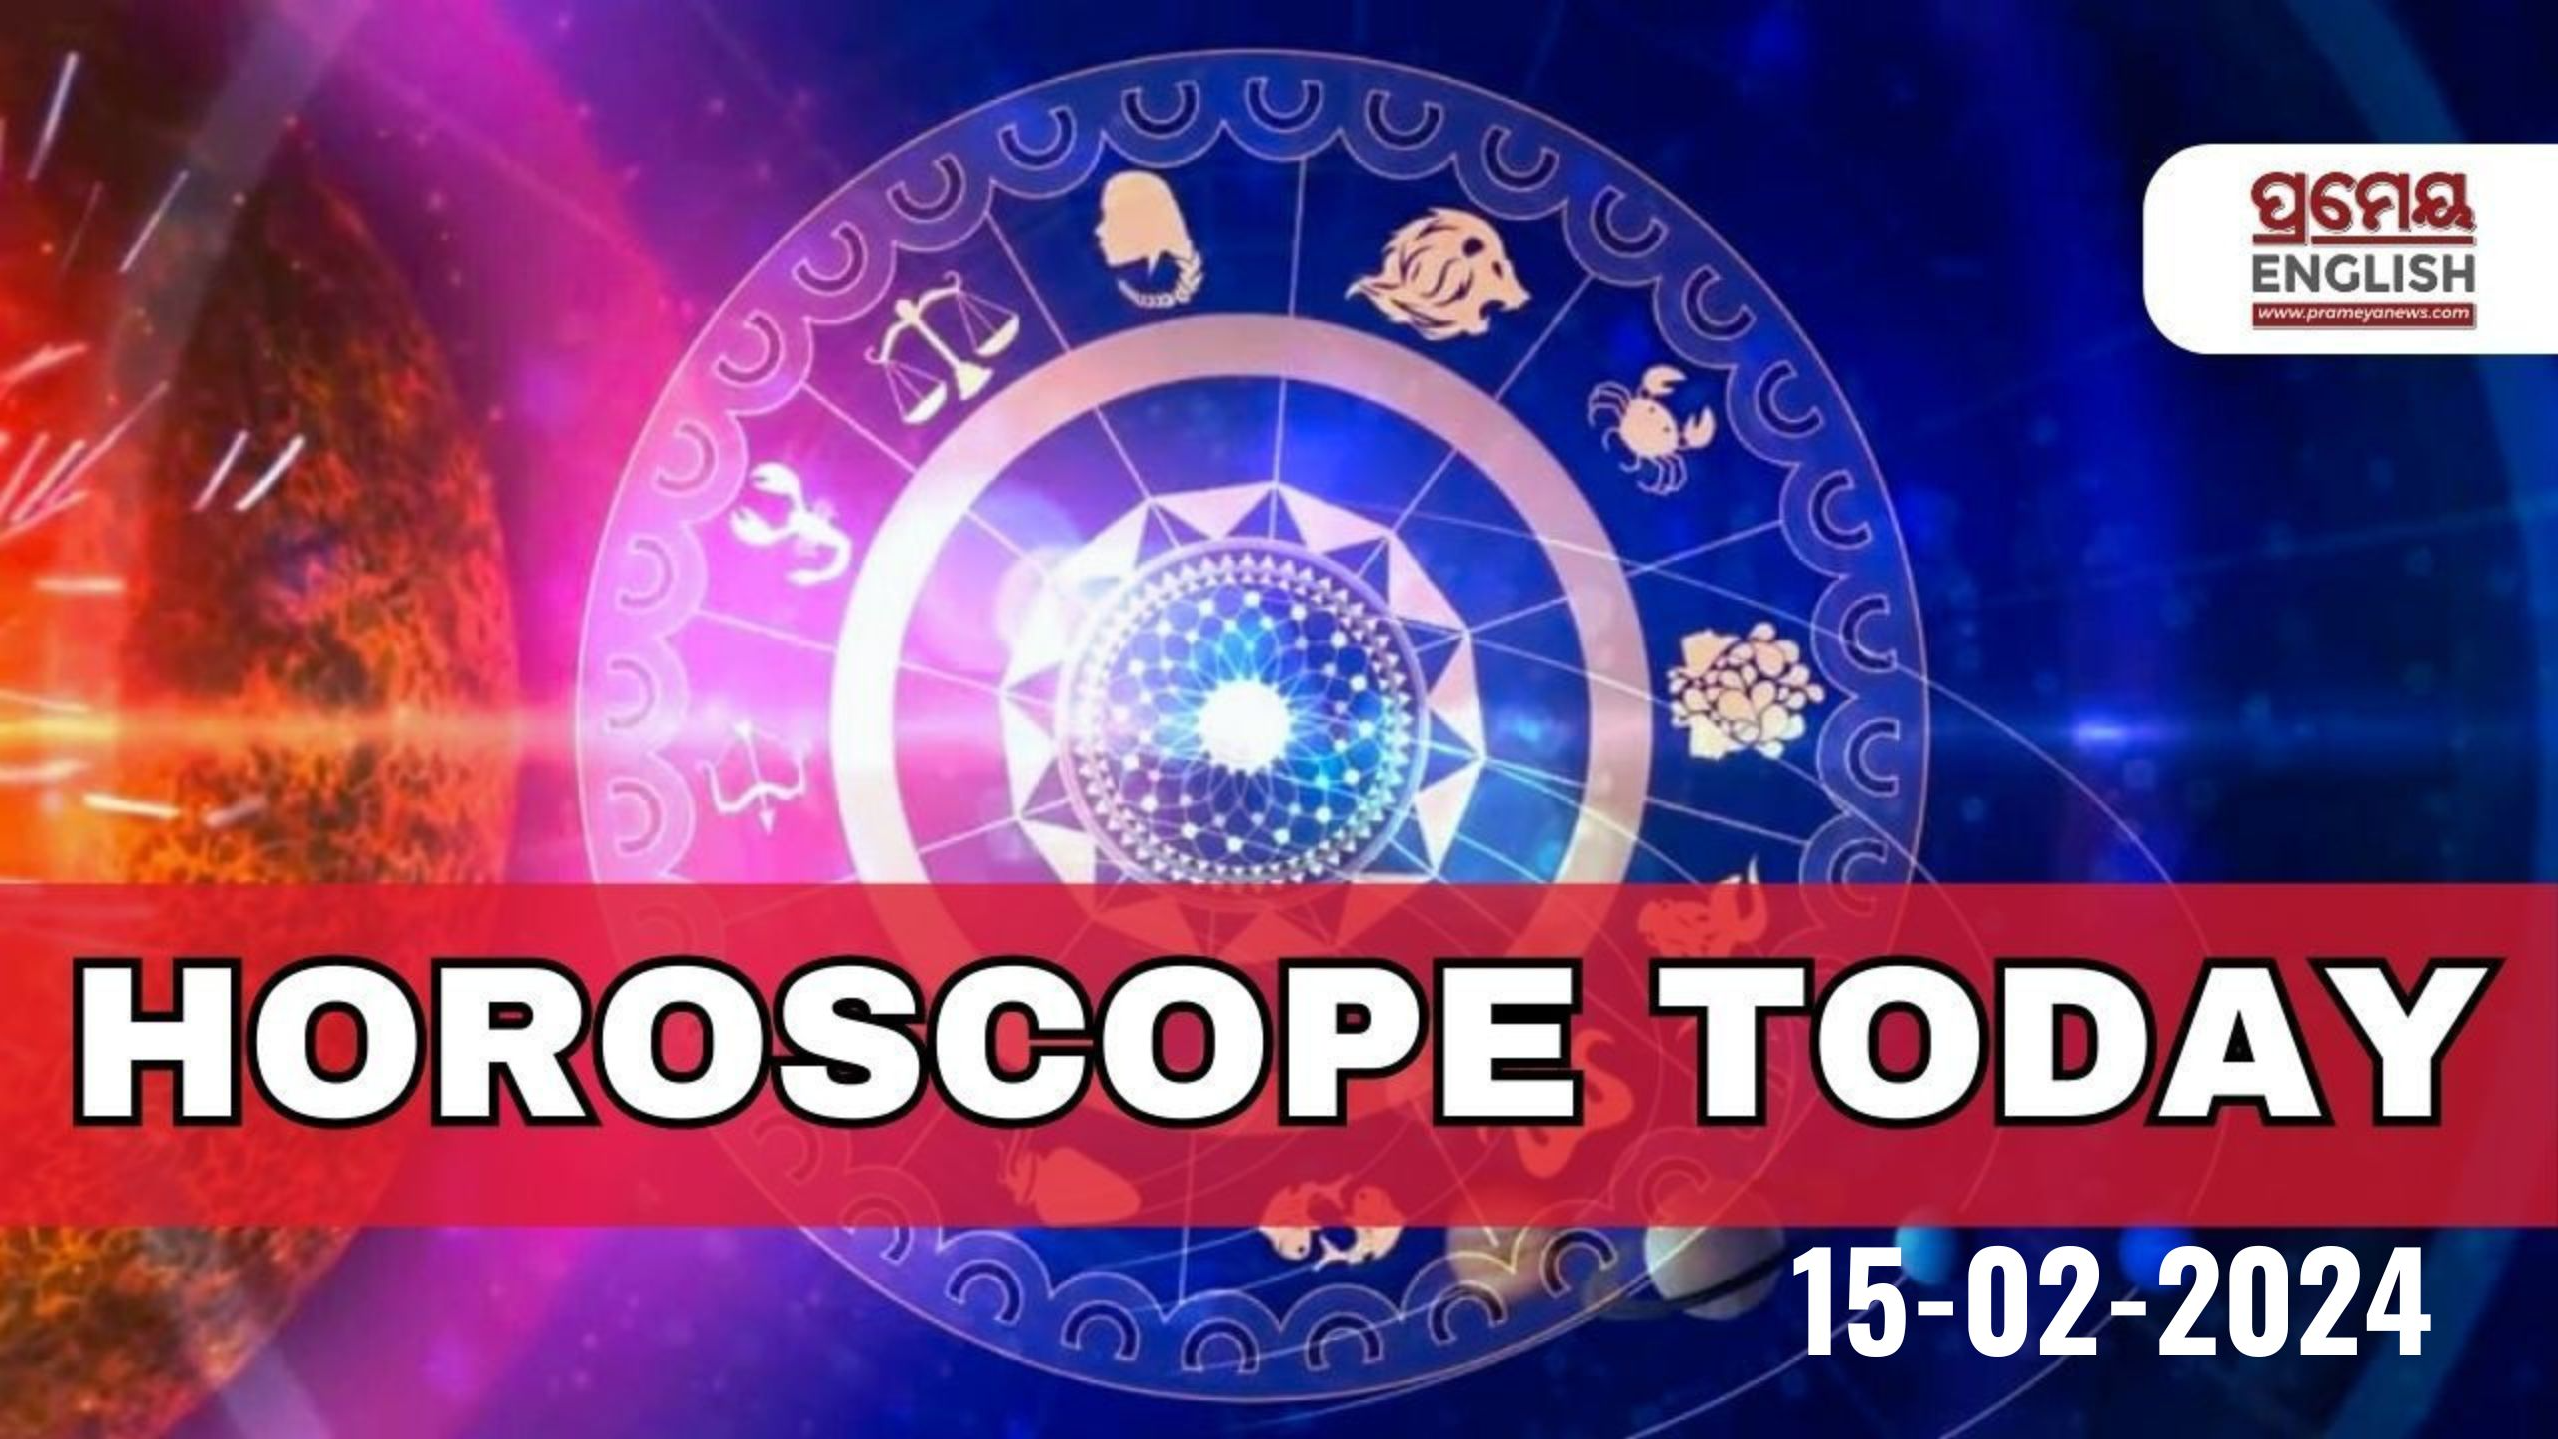 Daily Horoscope: Your Astrological Forecast for January 9, 2024